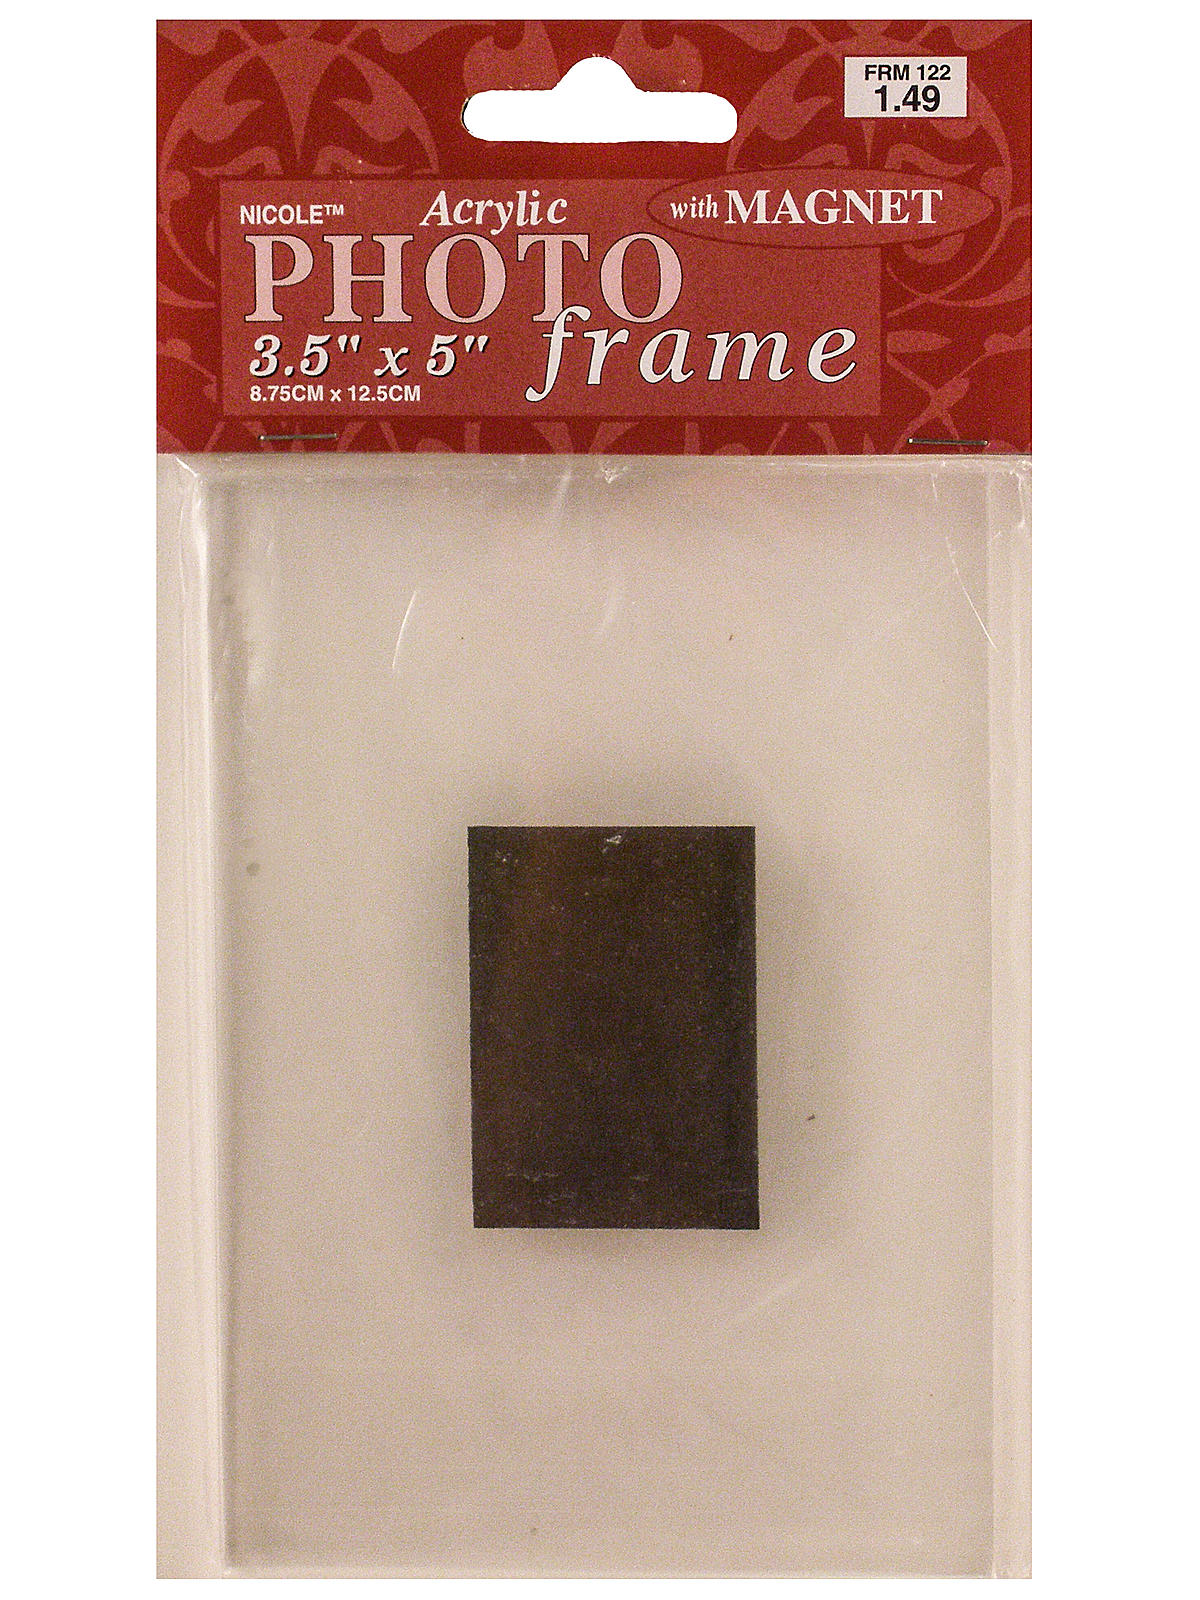 Acrylic Photo Frames Magnet Mount 3 1 2 In. X 5 In.